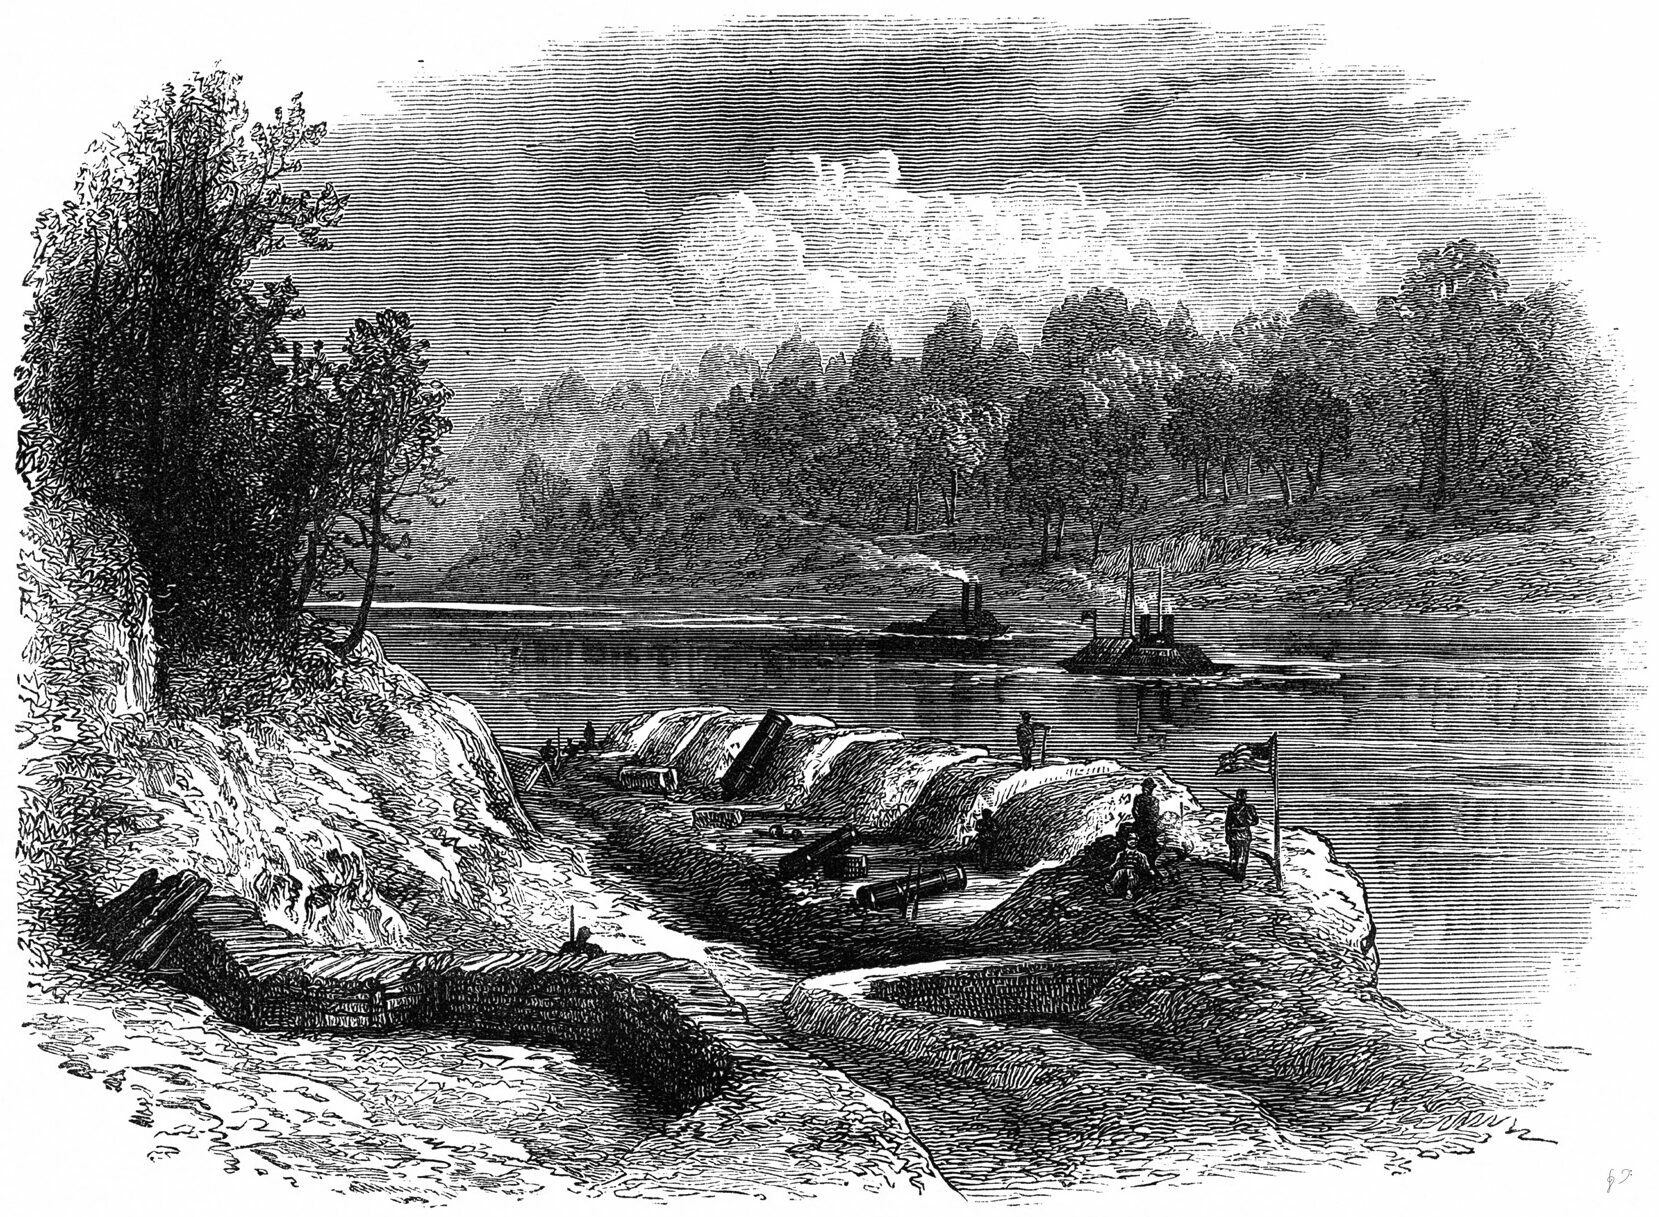 The Union Navy controlled the Mississippi River at the time of the battle, and its gunboats were detailed to support Fort Pillow’s garrison.